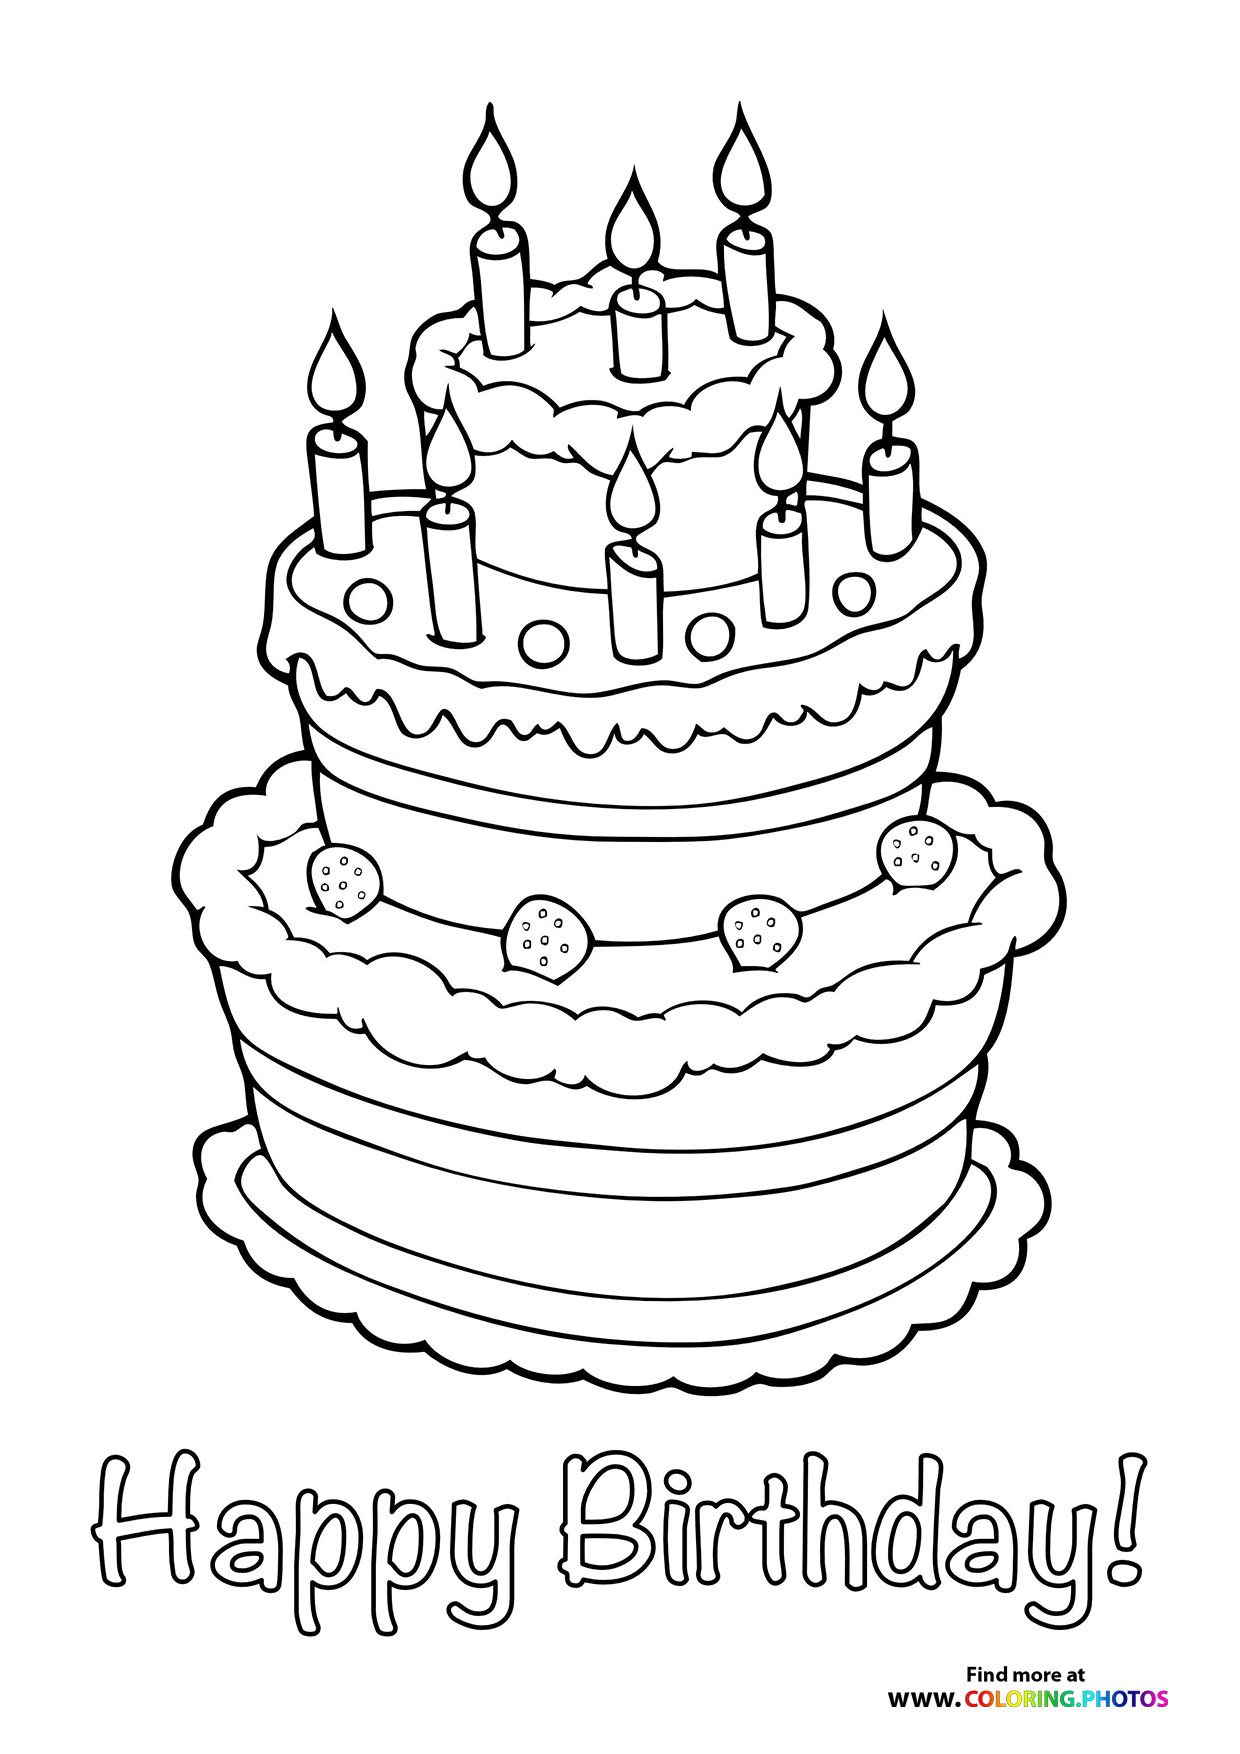 Happy birthday cake - Coloring Pages ...